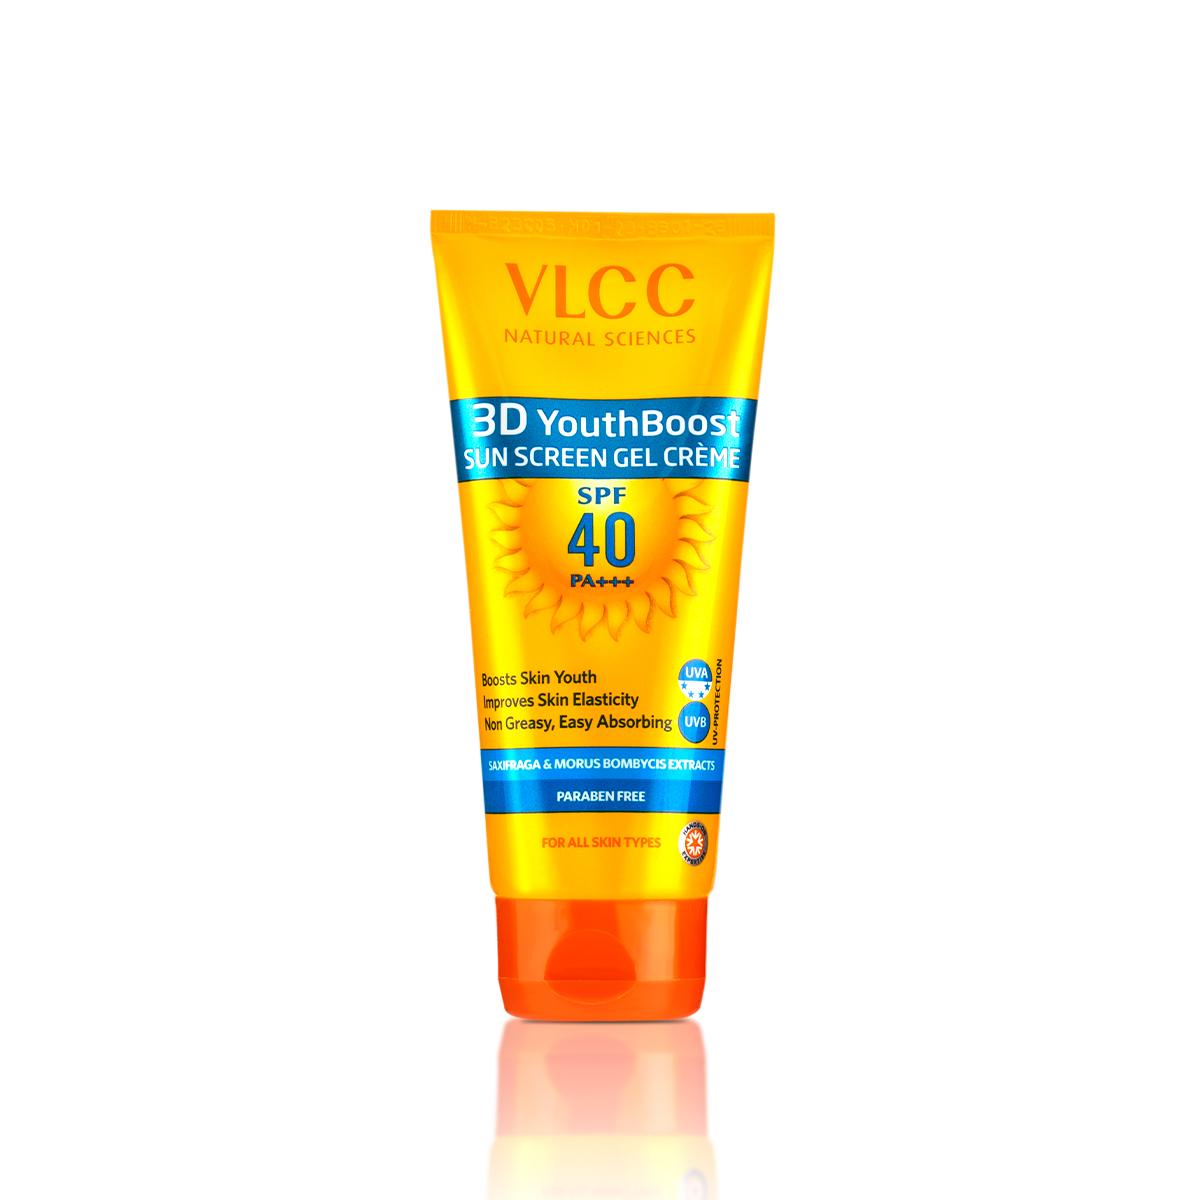 VLCC 3D Youth Boost SPF40 +++ Sunscreen - Protect and Enhance Your Youthful Skin